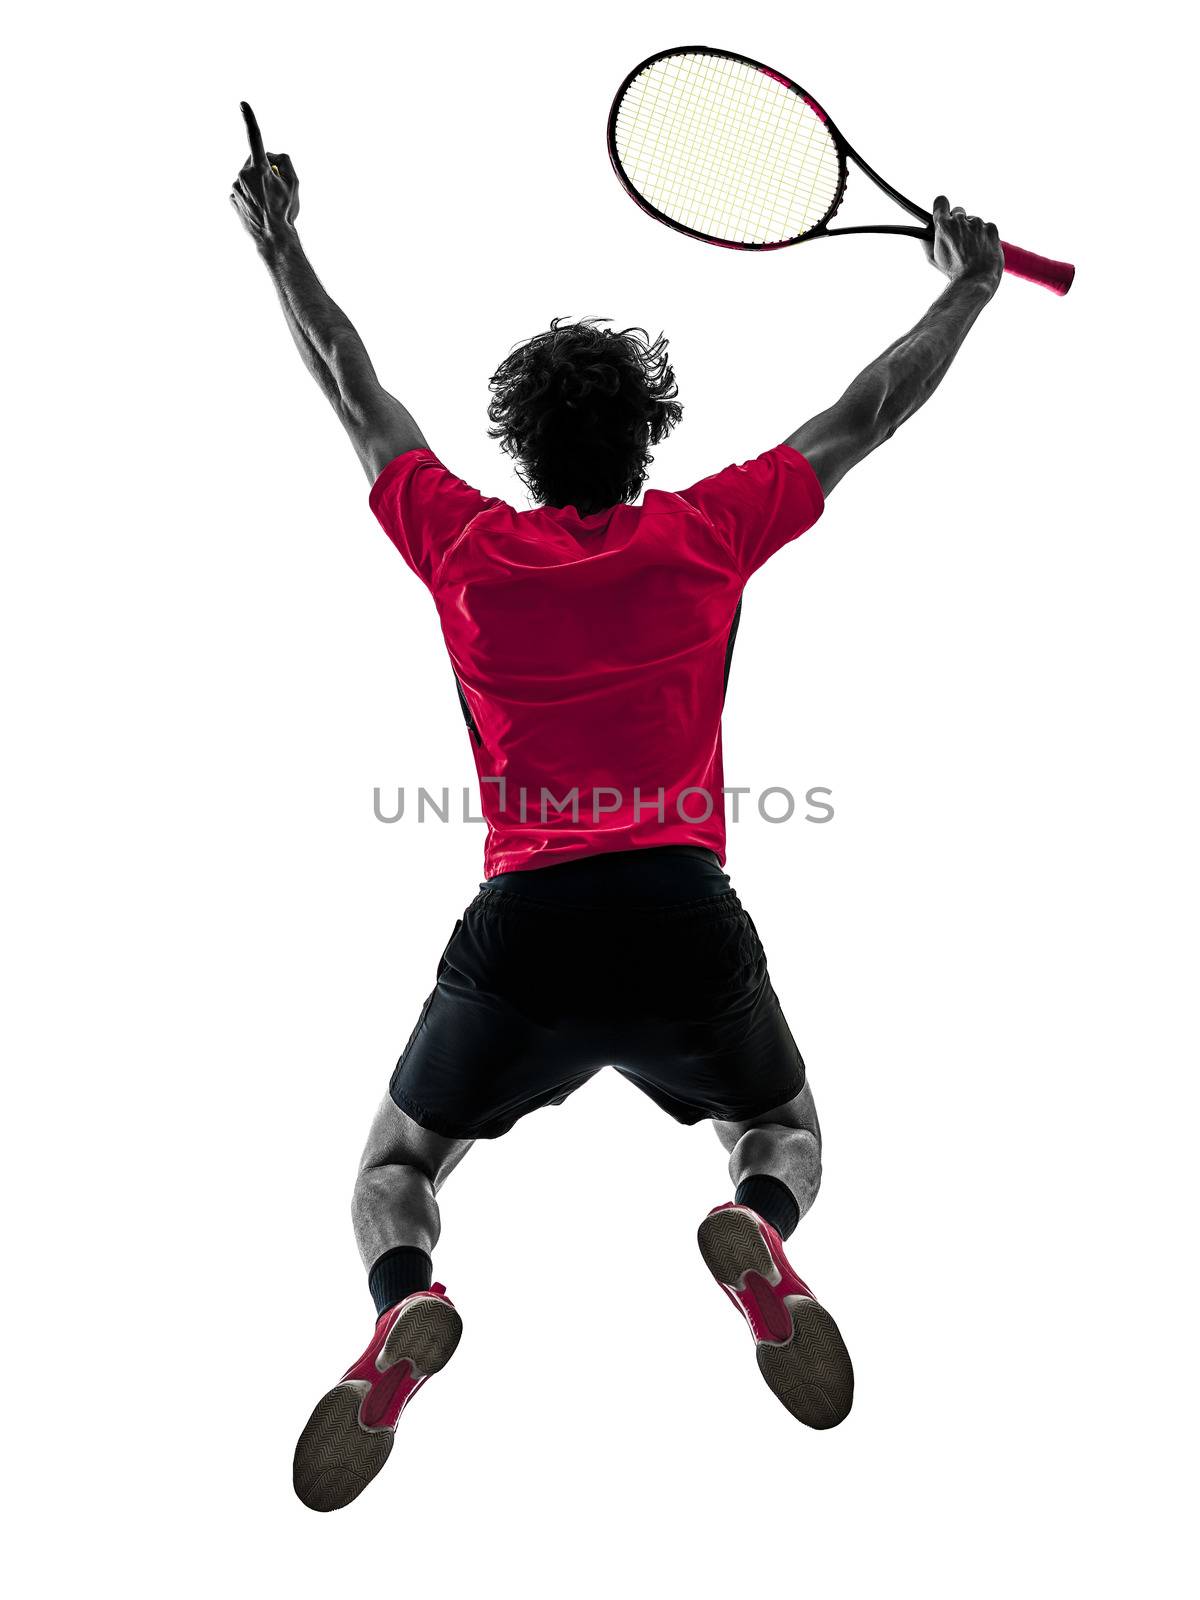 tennis player man silhouette isolated white background by PIXSTILL